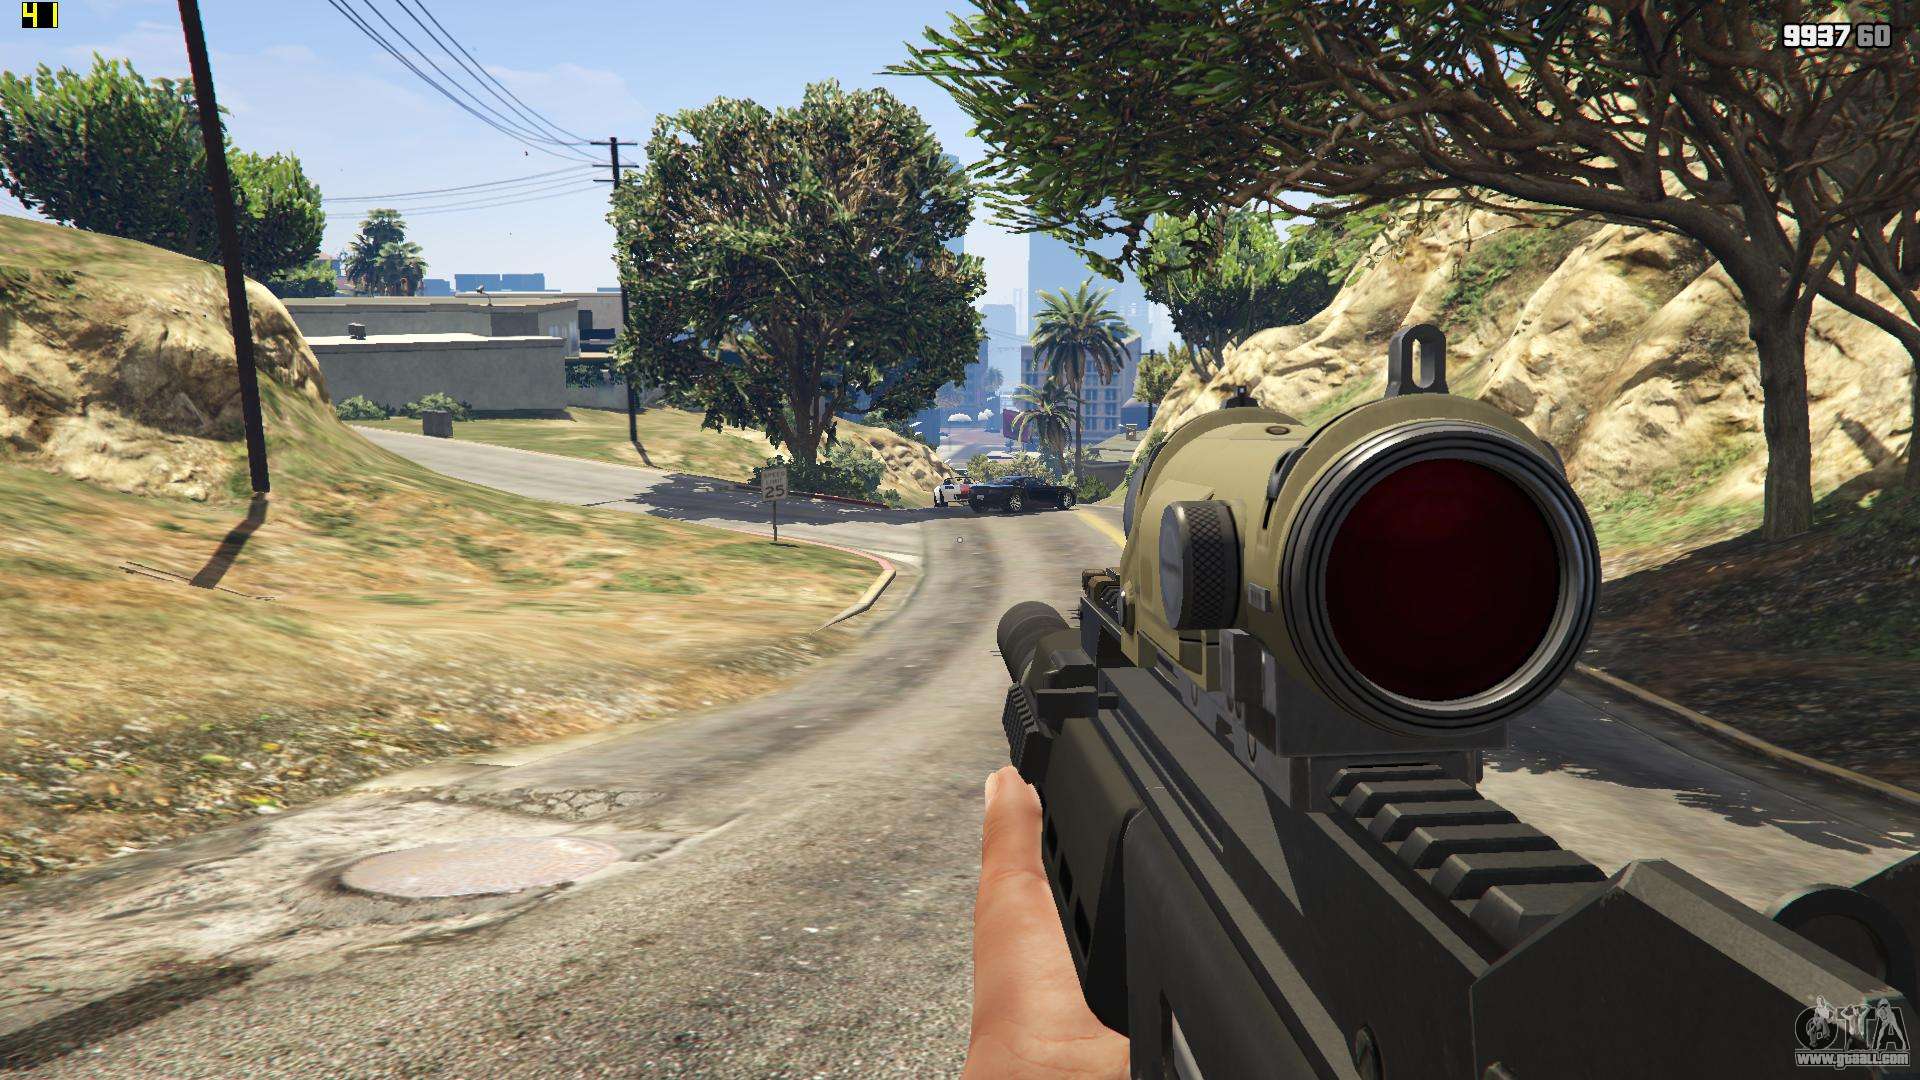 How To See Fps In Gta 5